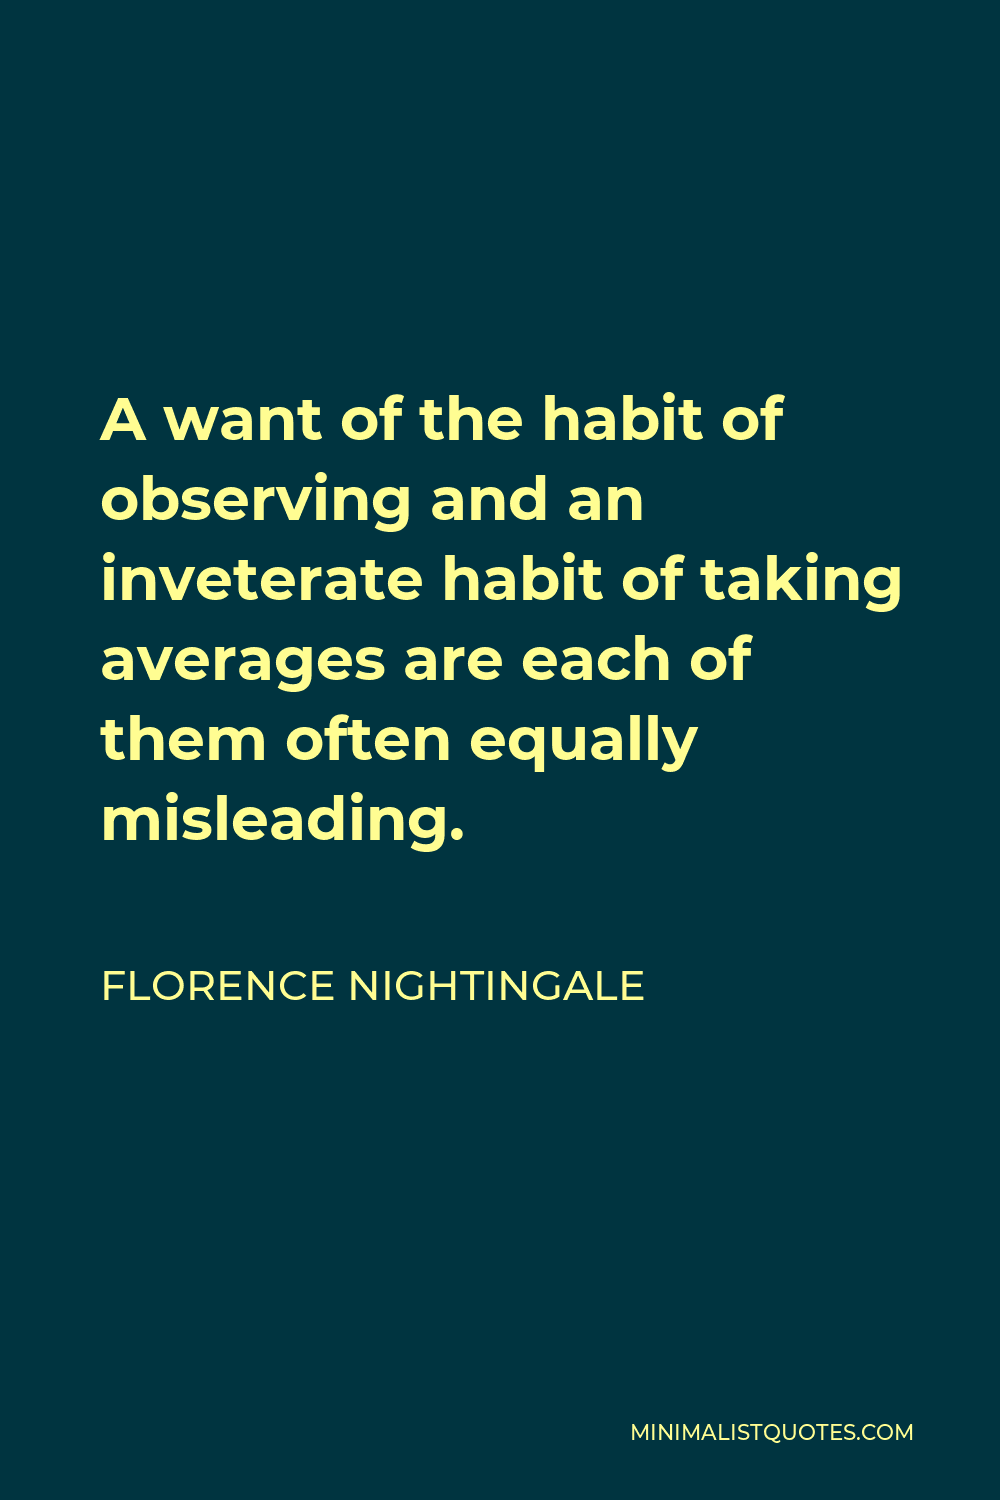 Florence Nightingale Quote - A want of the habit of observing and an inveterate habit of taking averages are each of them often equally misleading.